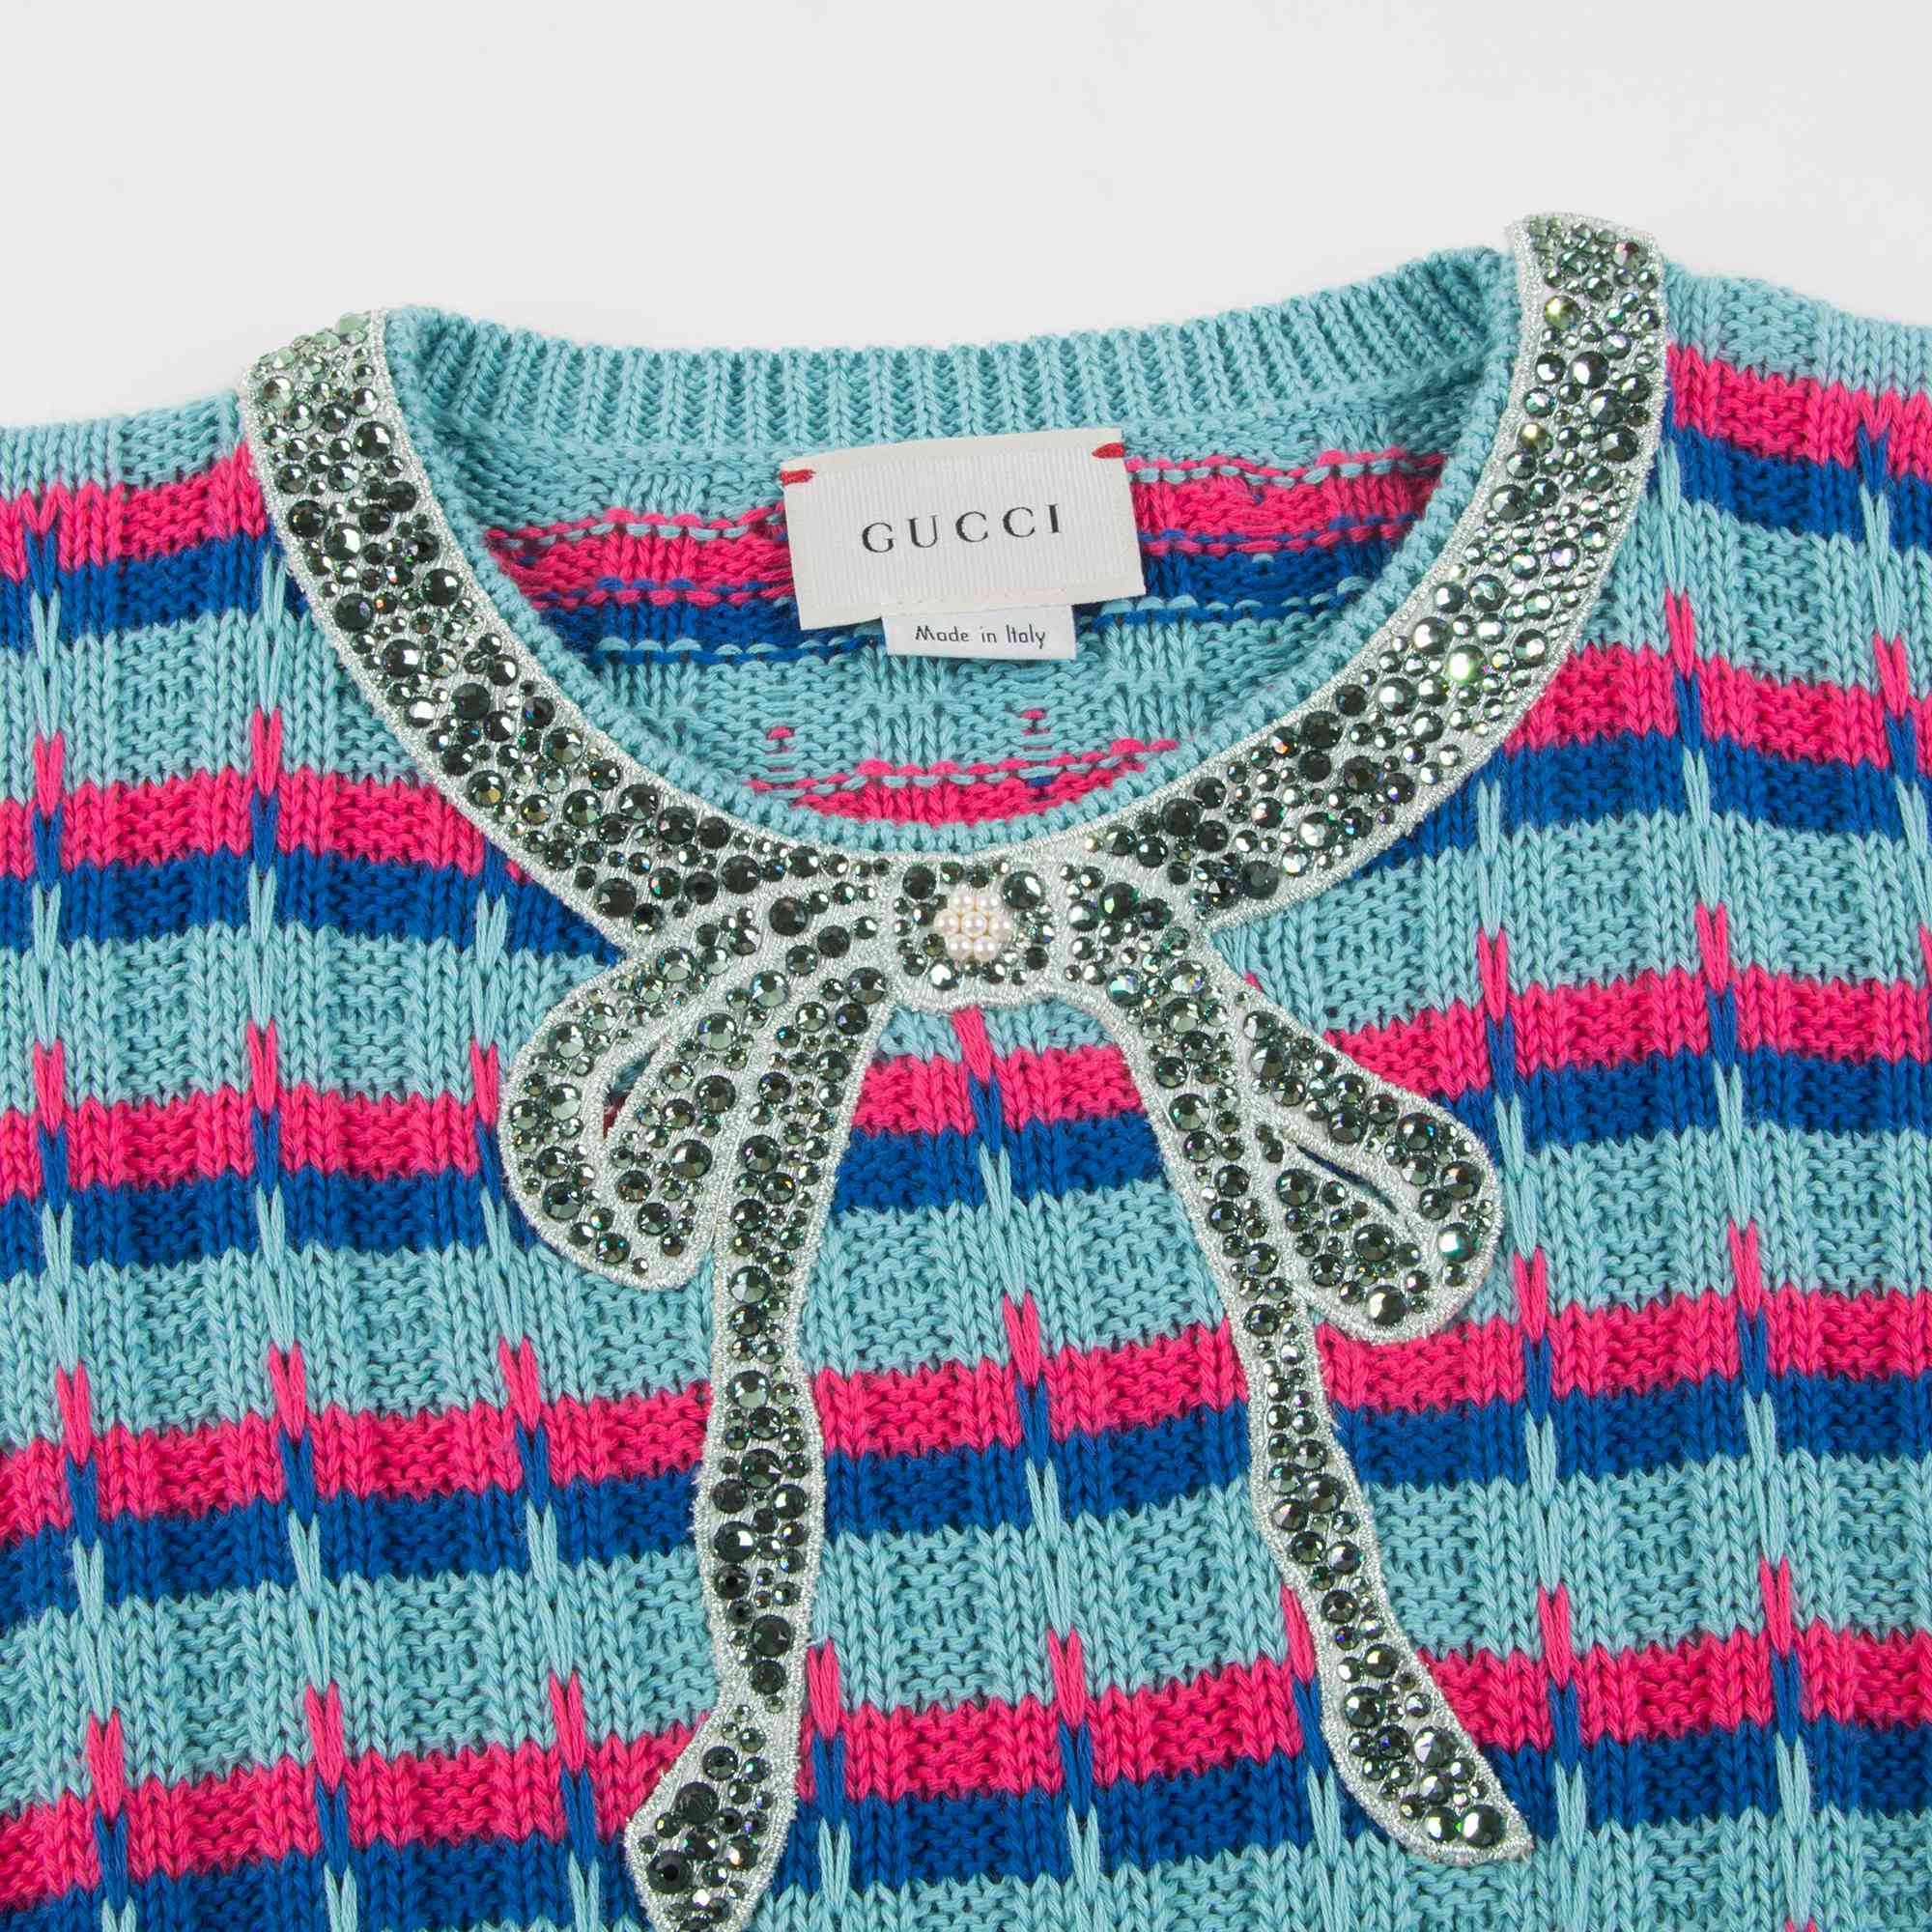 Girls Color Striped Sweater